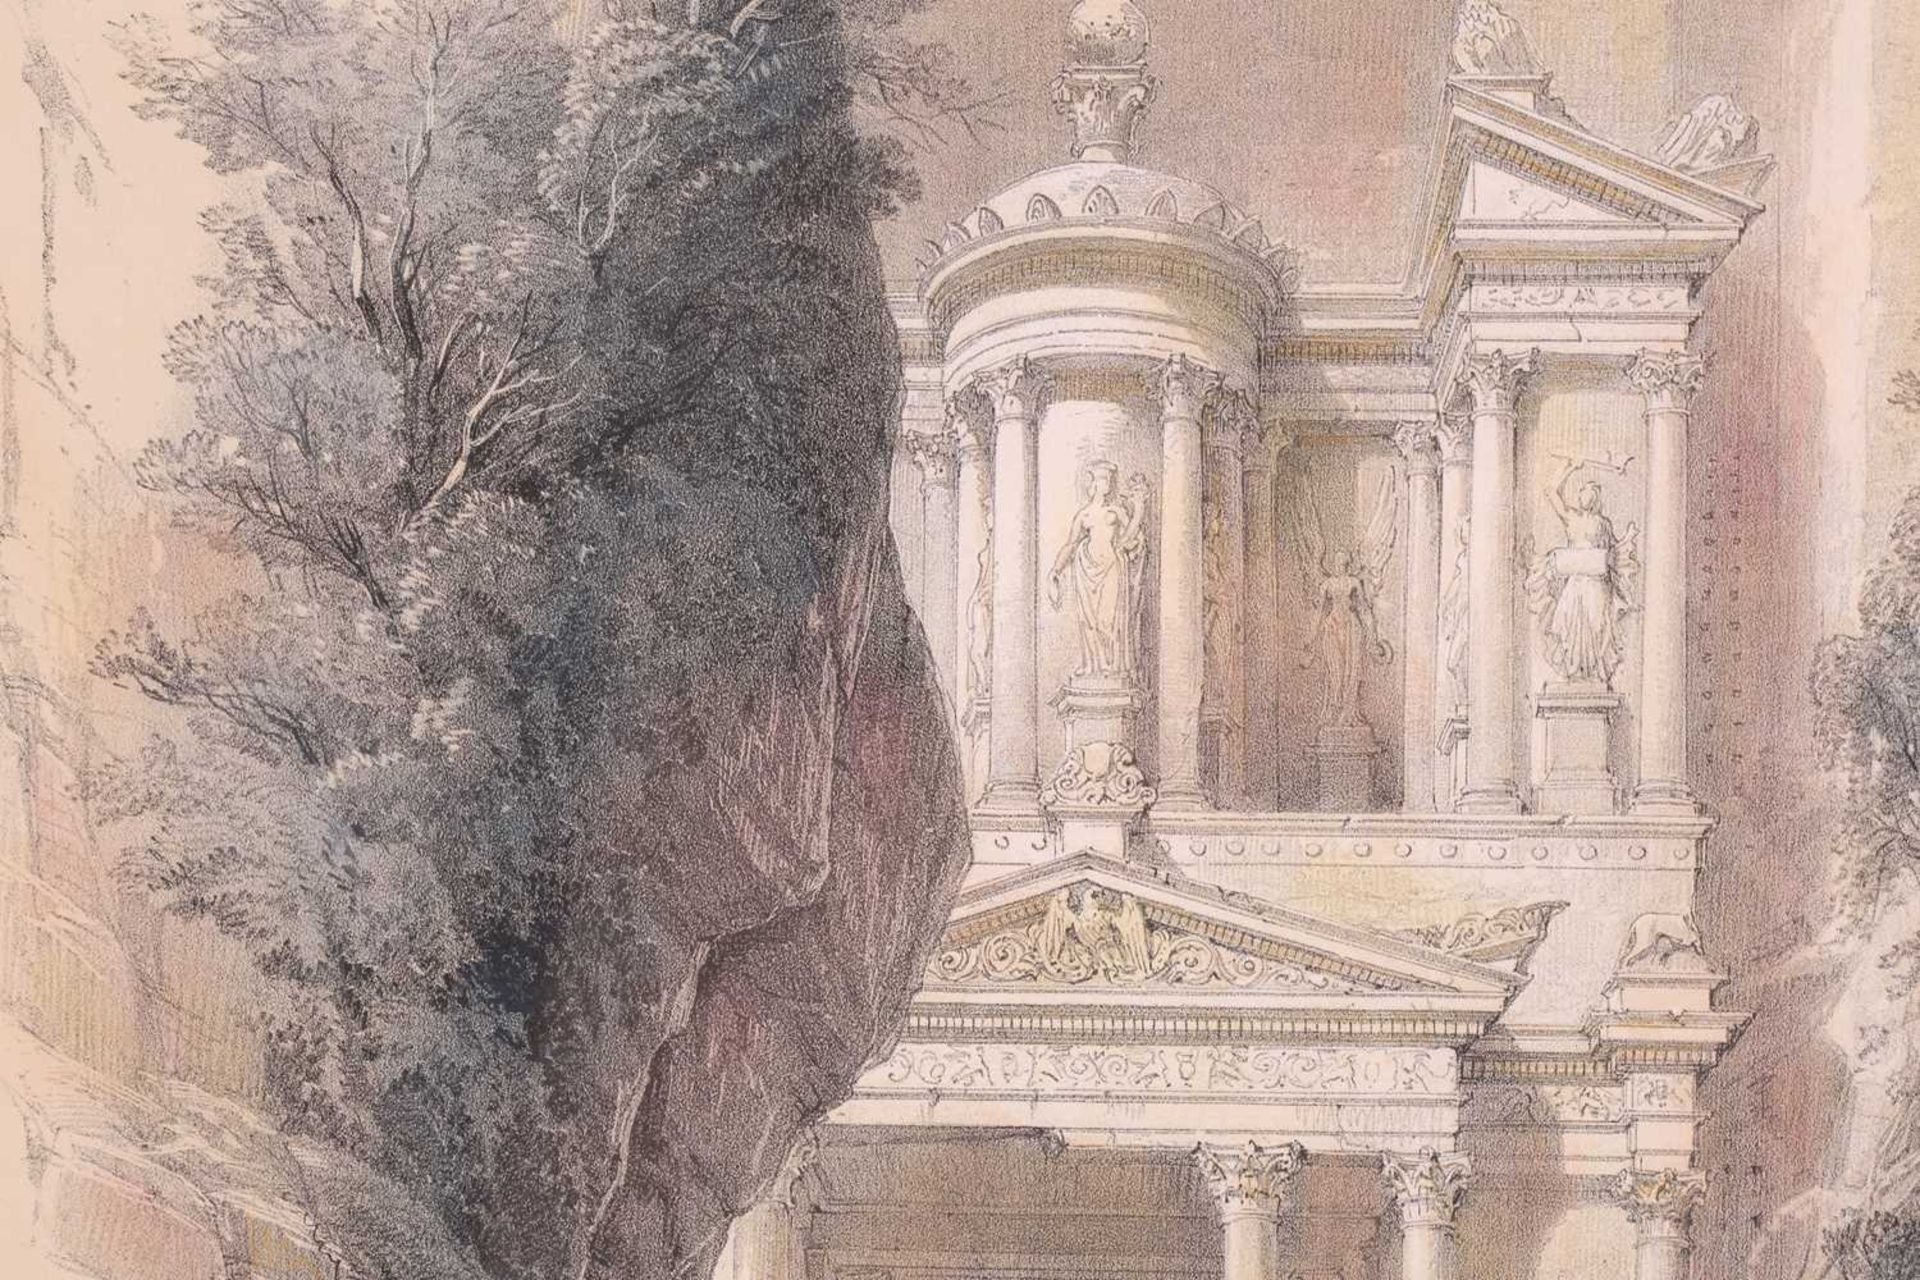 After David Roberts (1796 - 1864), 'Excavated Temple at Petra called El Khasneh, or The Treasury', - Image 3 of 23